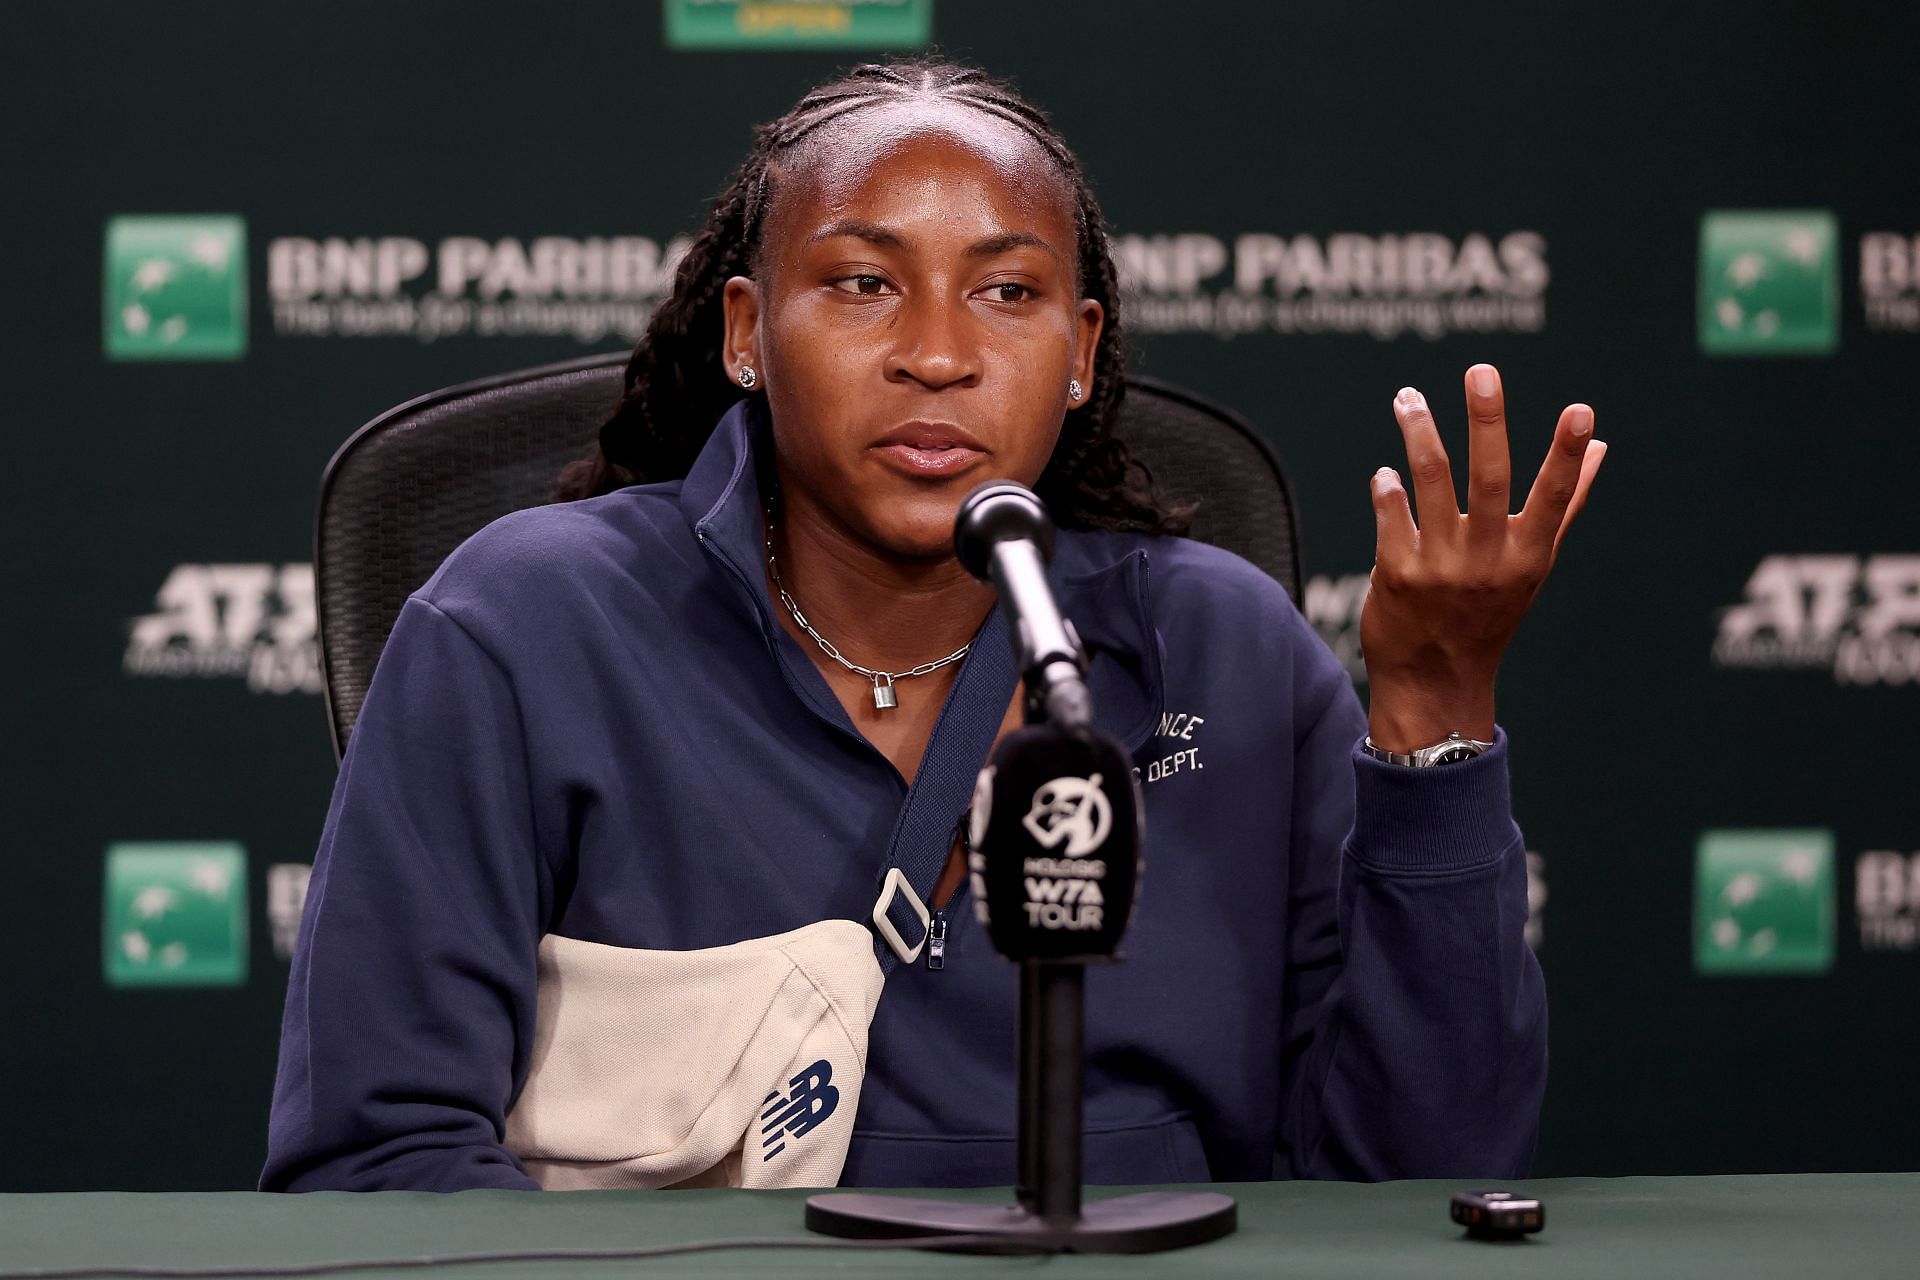 Coco Gauff at the Indian Wells Open